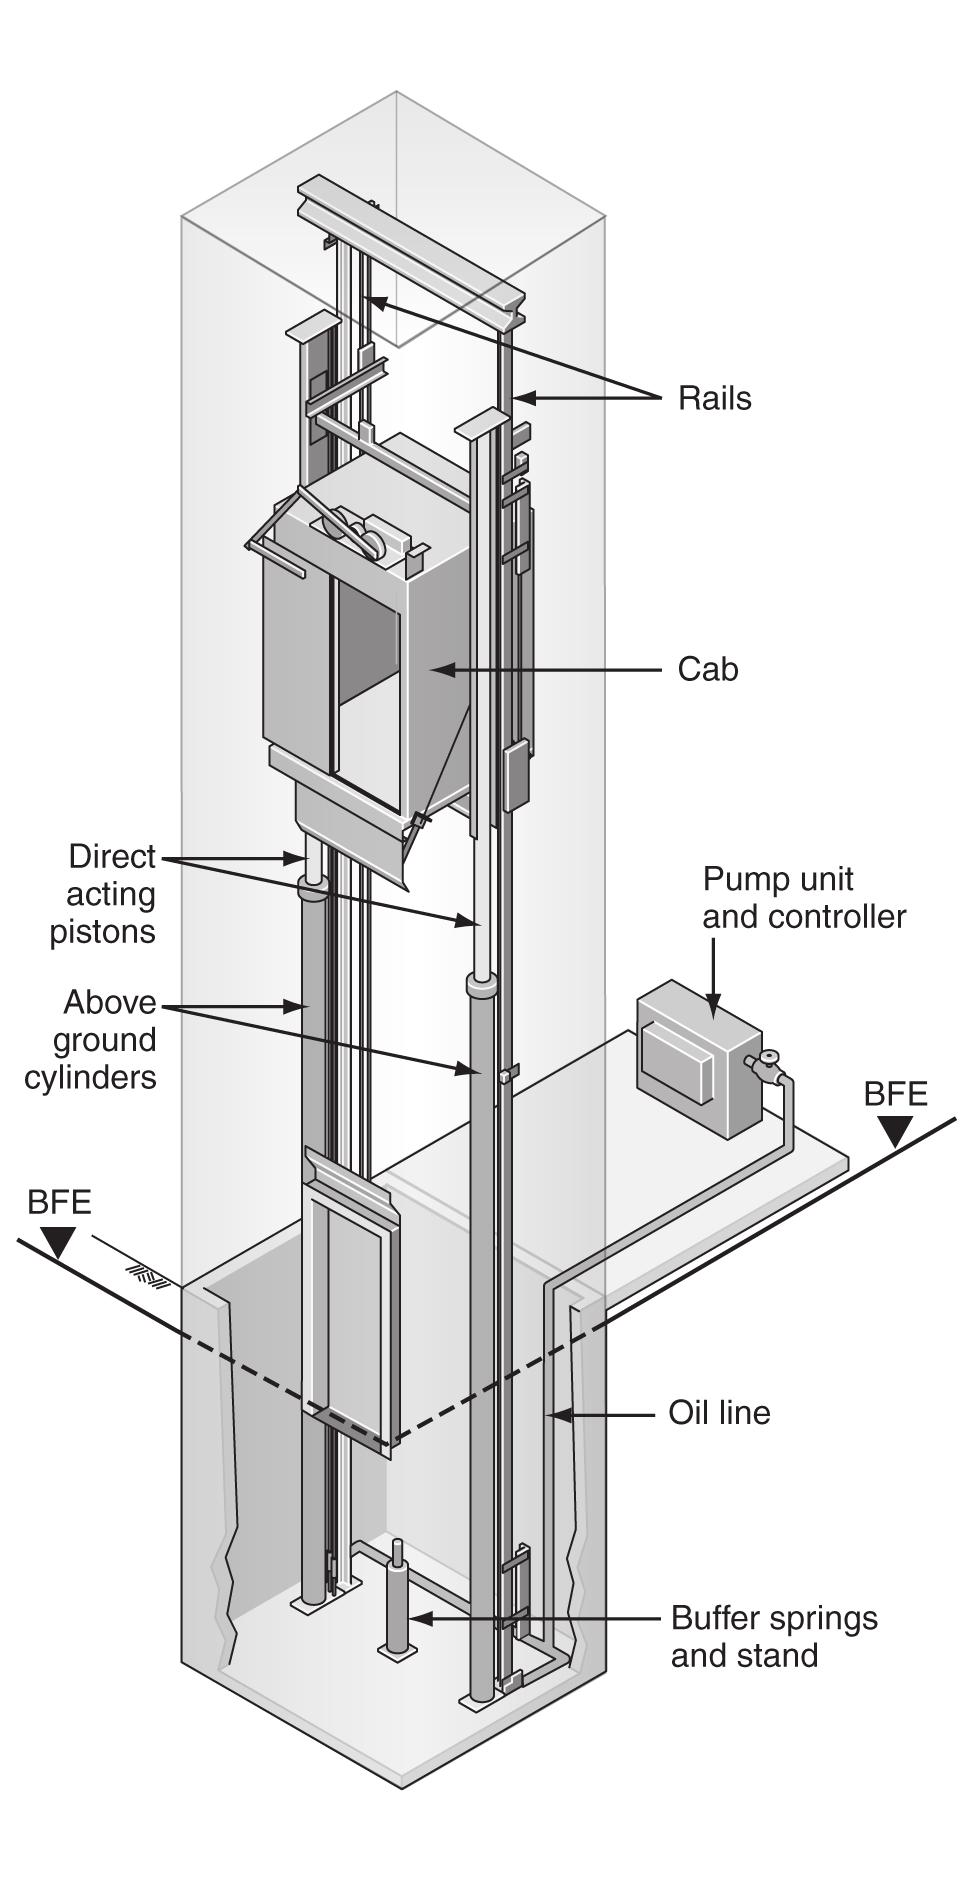 Pneumatic elevator cabs are controlled by a roof-mounted suction system.